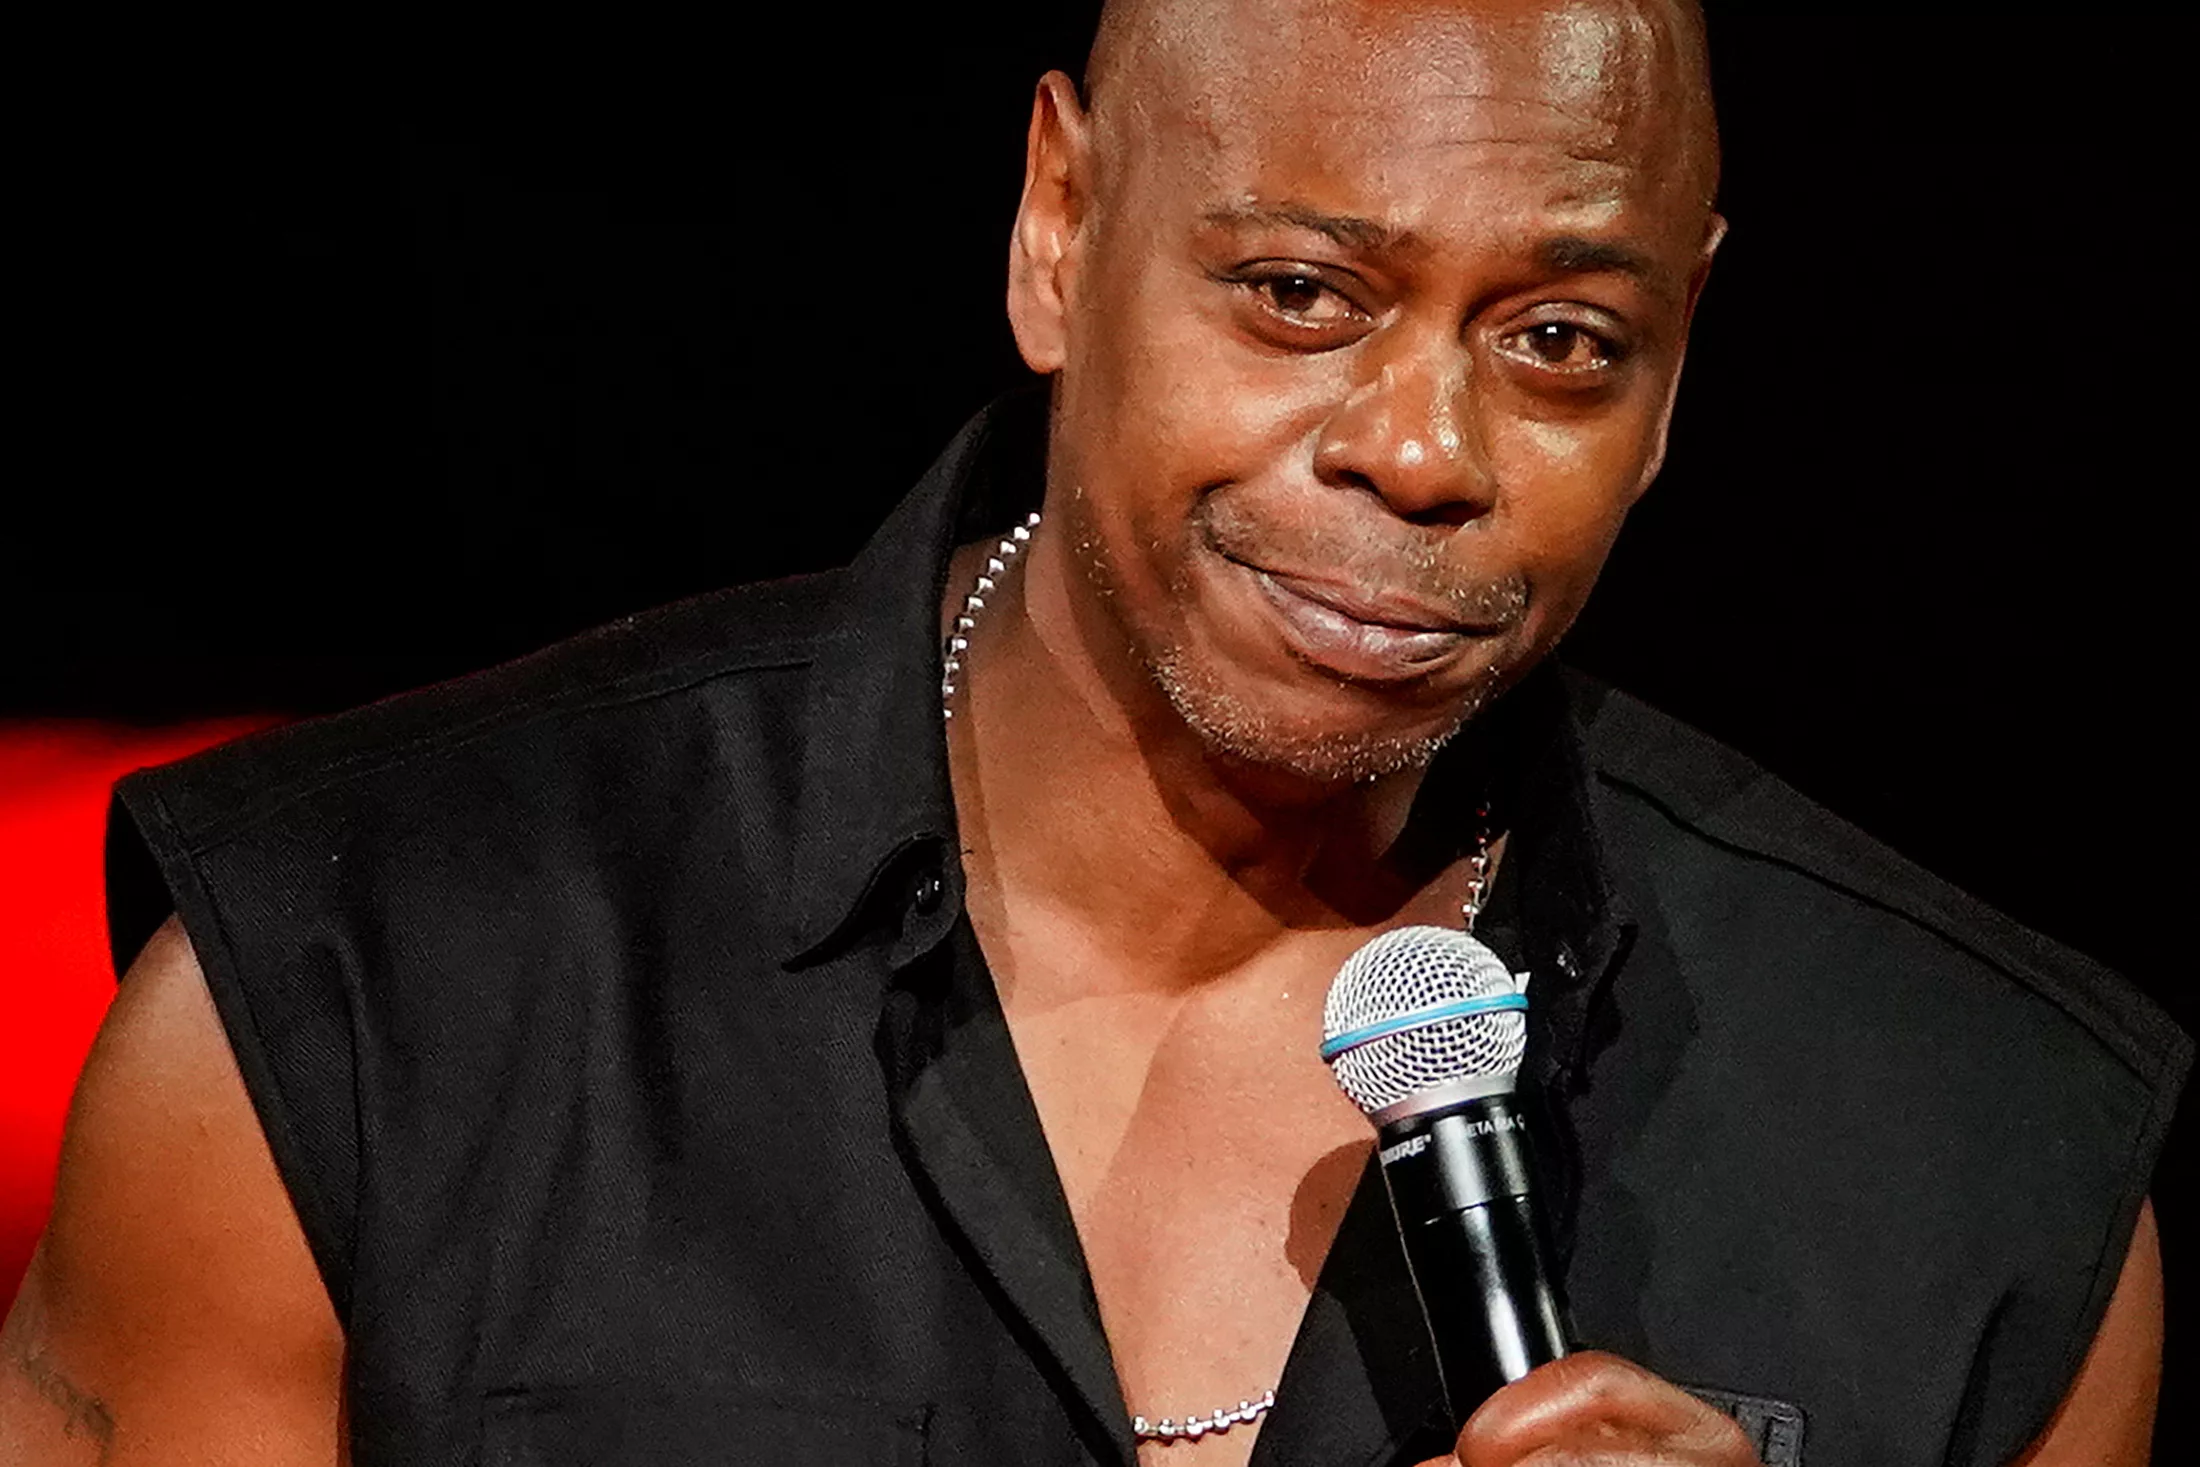 comedian-dave-chappelle-performs-at-madison-square-garden-in-new-york-city